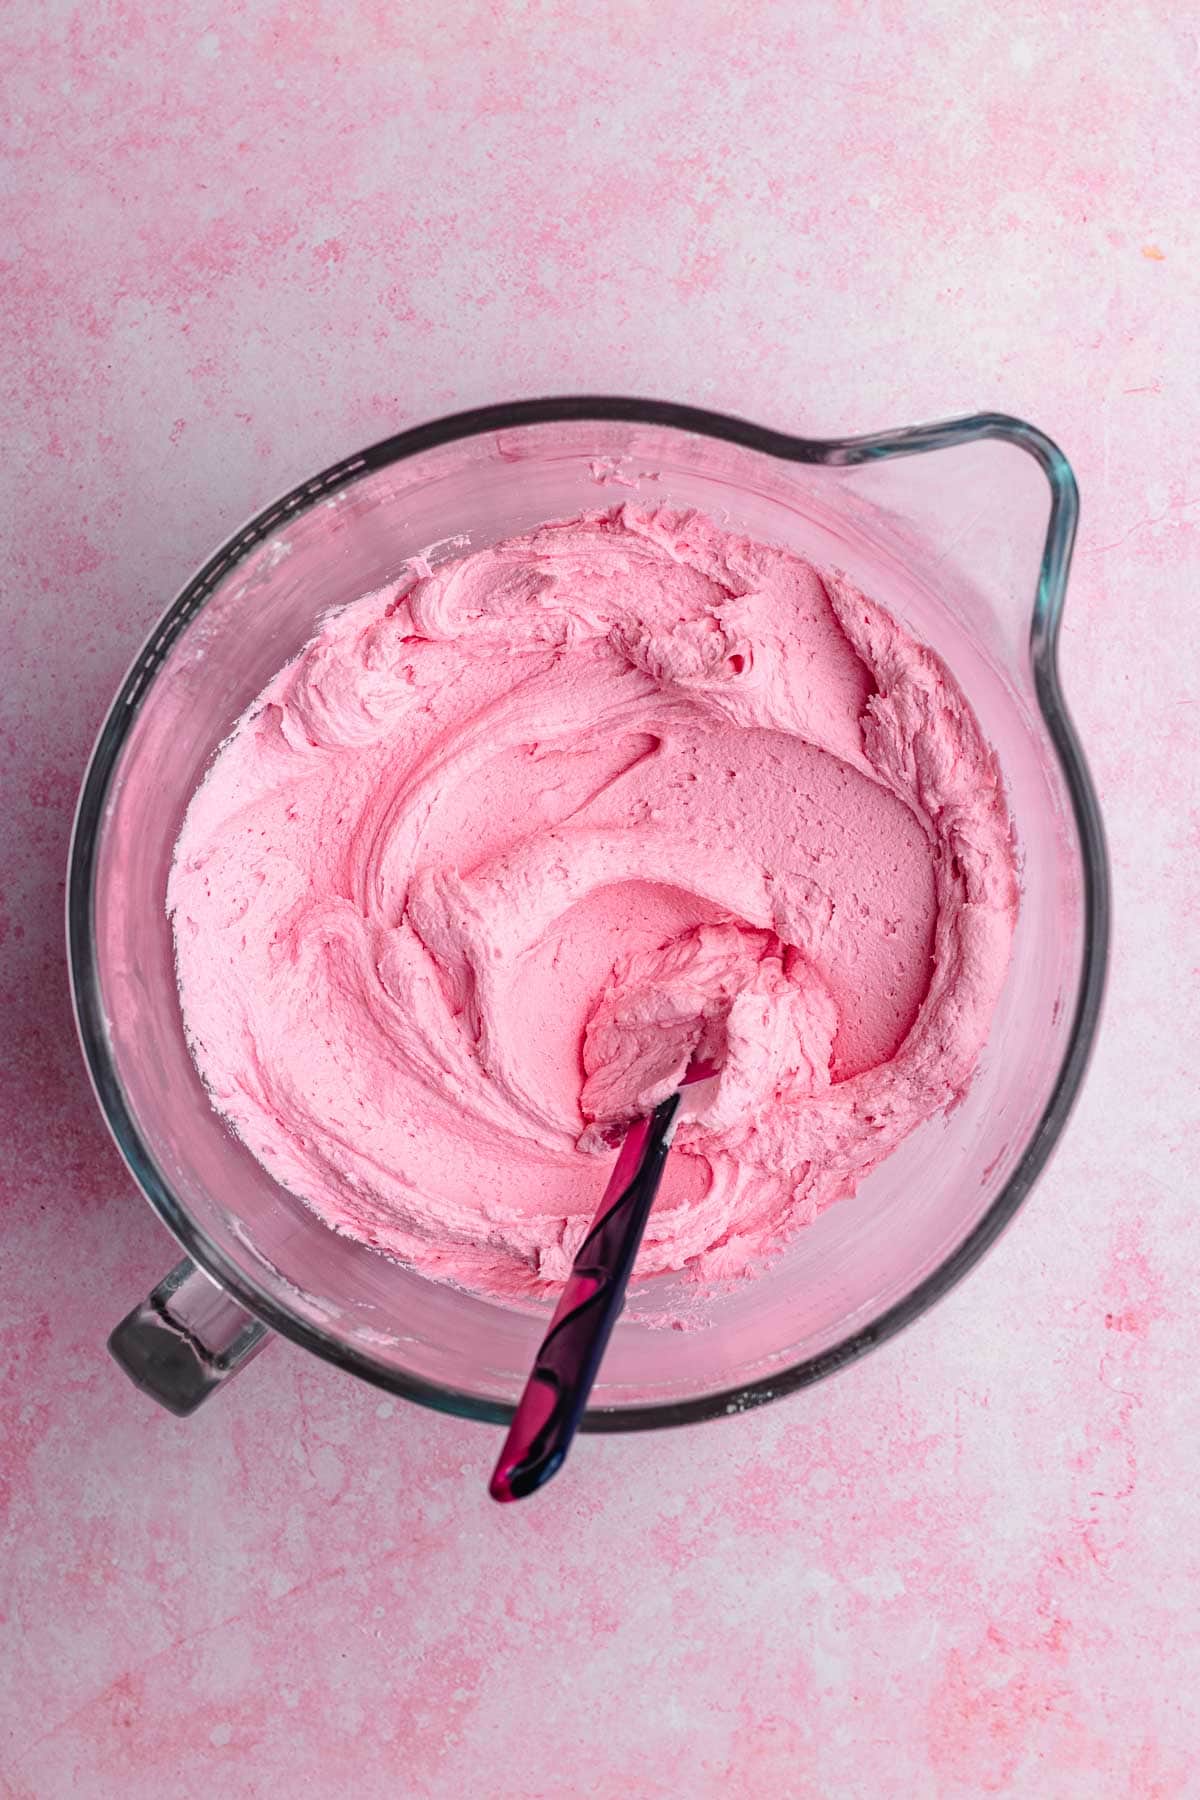 Pink Velvet Cake frosting mixed in bowl with spatula